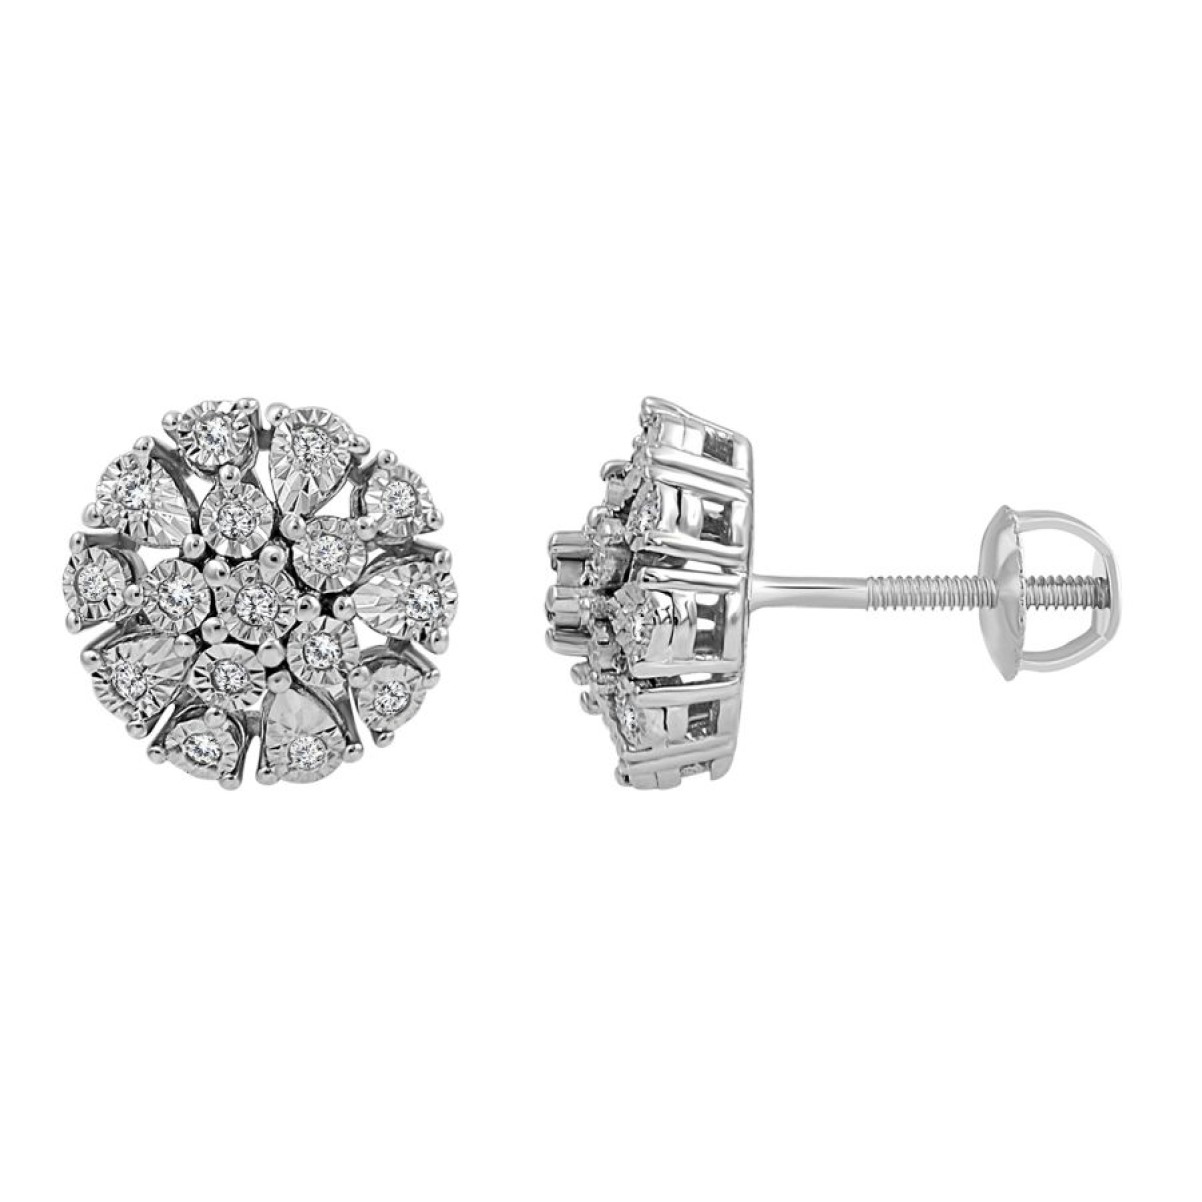 EARRINGS 0.10CT ROUND DIAMOND STERLING SILVER WHITE